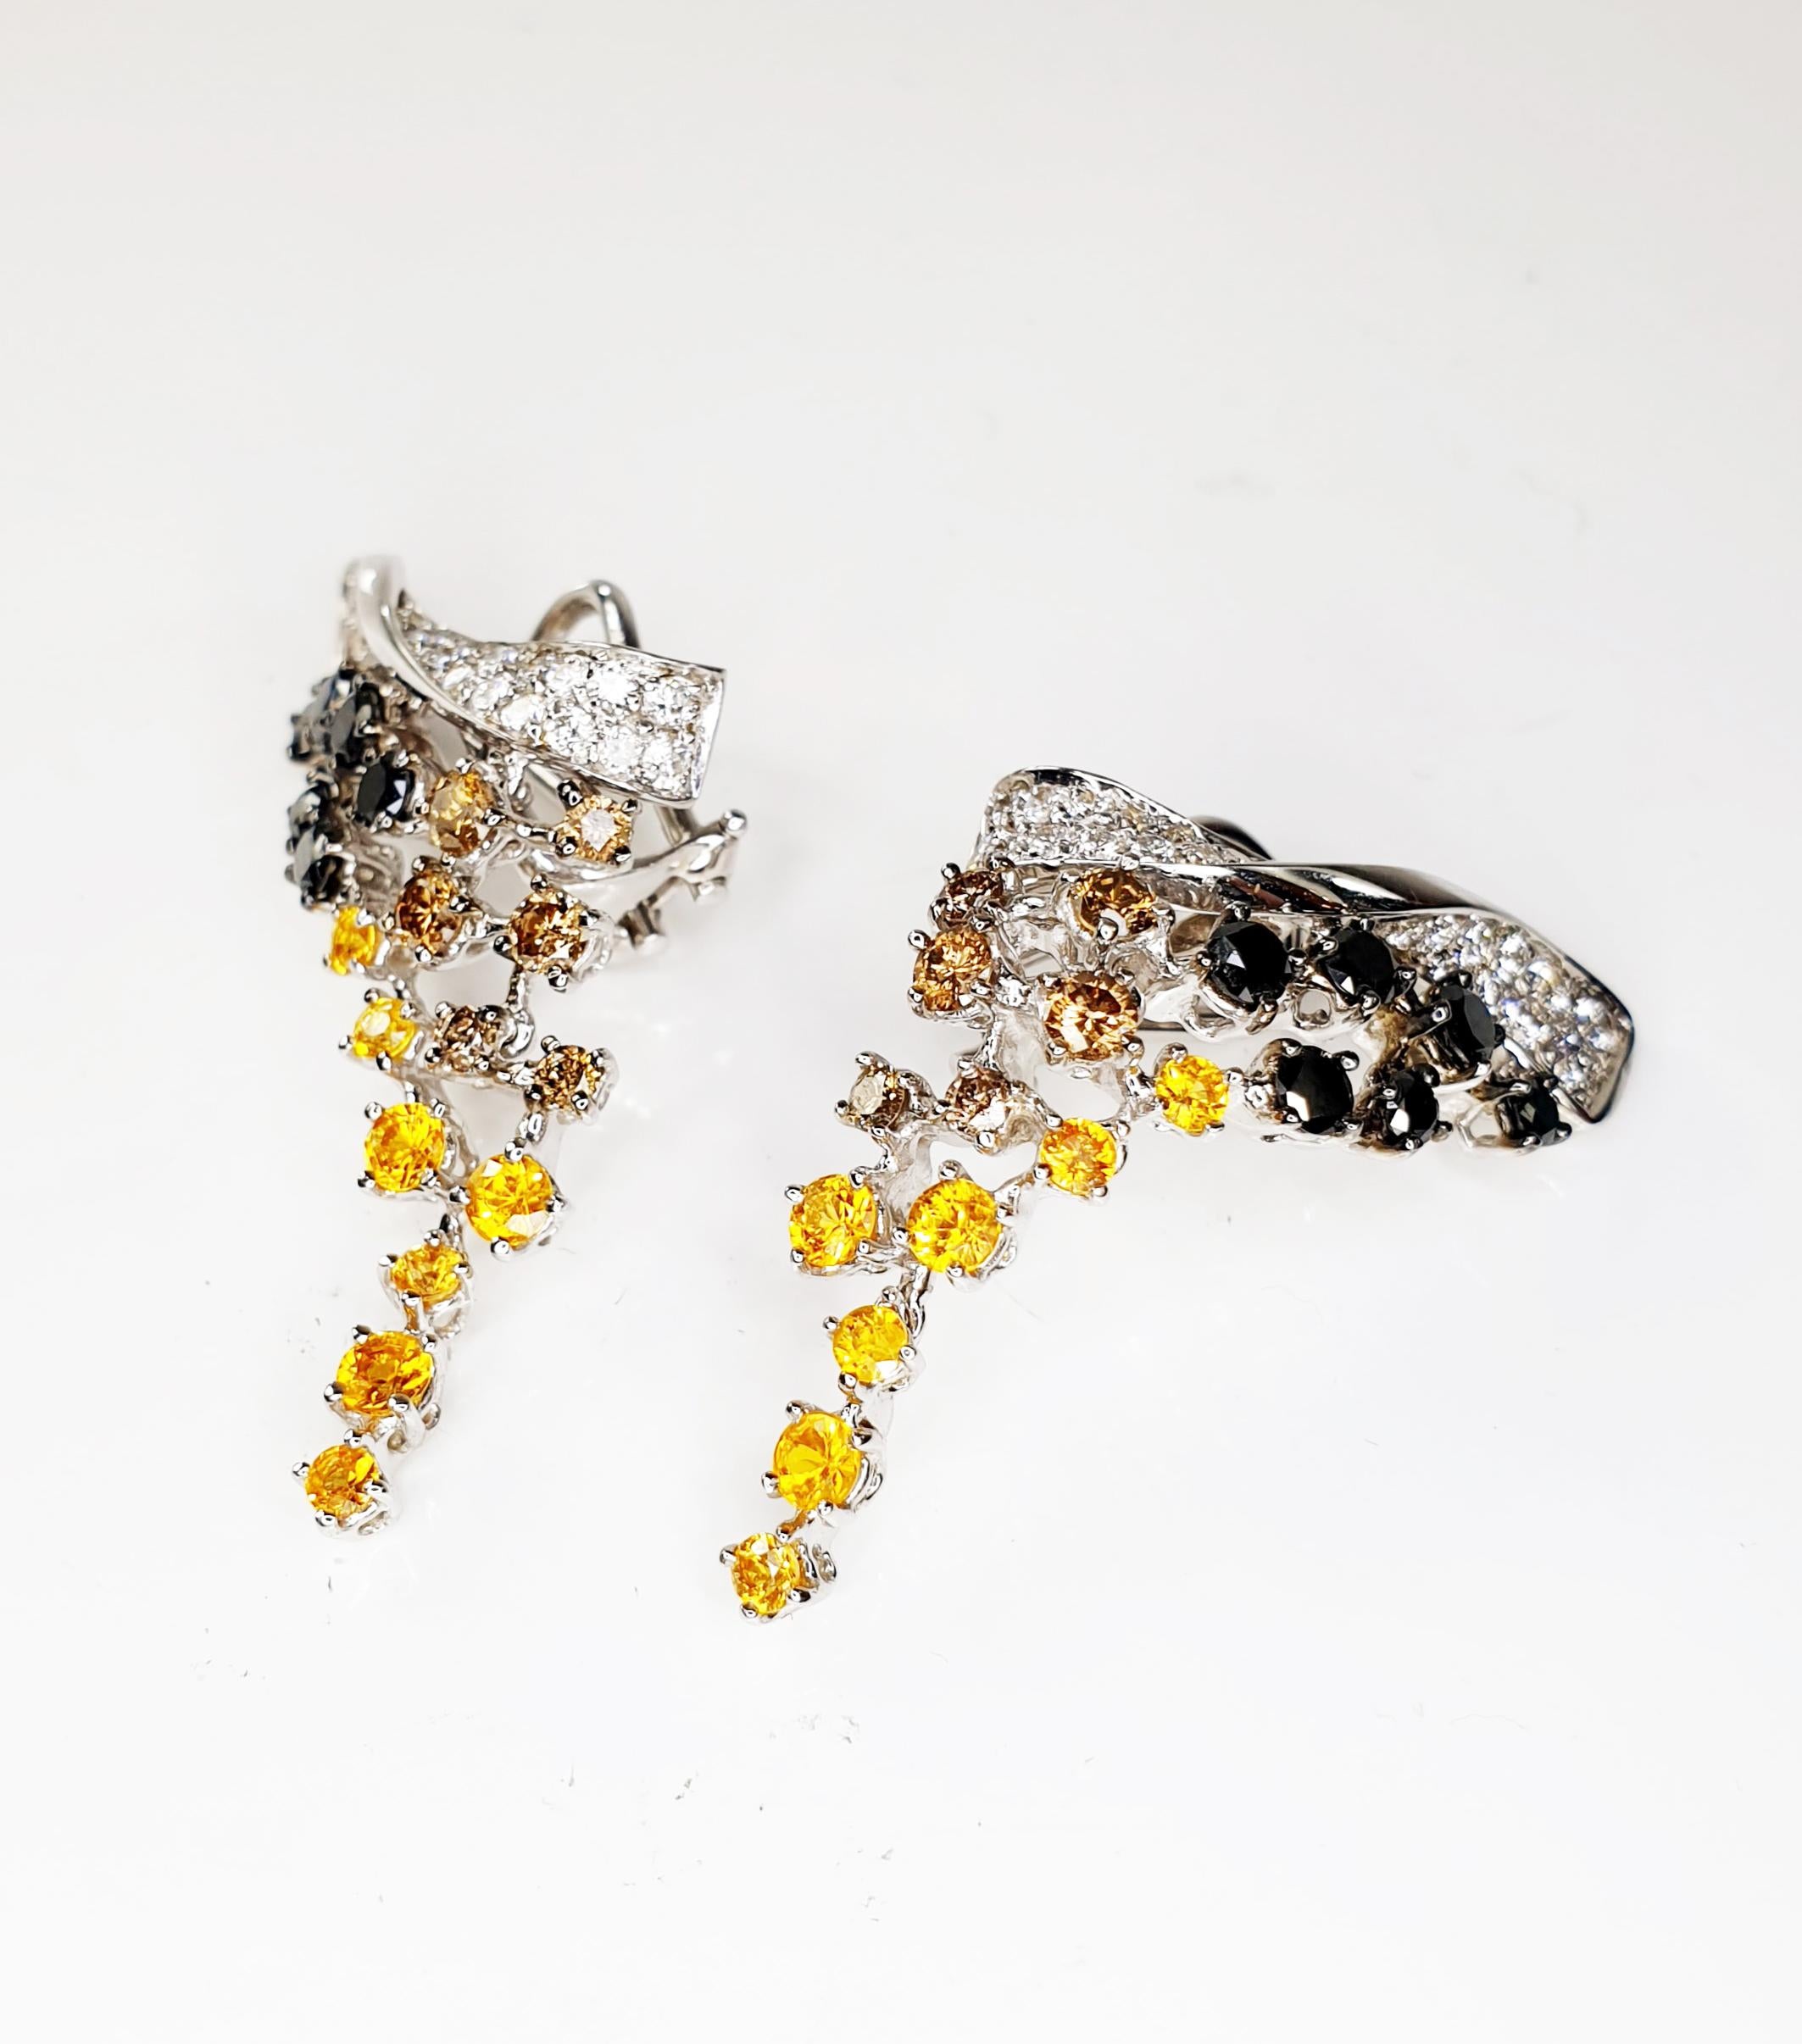 Earrings in 18k white gold, articulated cluster motif full of brilliant-cut diamonds 
Crowned by a pavè of white diamonds in a bow with a lace of black and brown diamonds
With cascade citrines quartz
MATERIAL
◘ Weight 11.8 grams 
◘ Size 39mm / 1.53